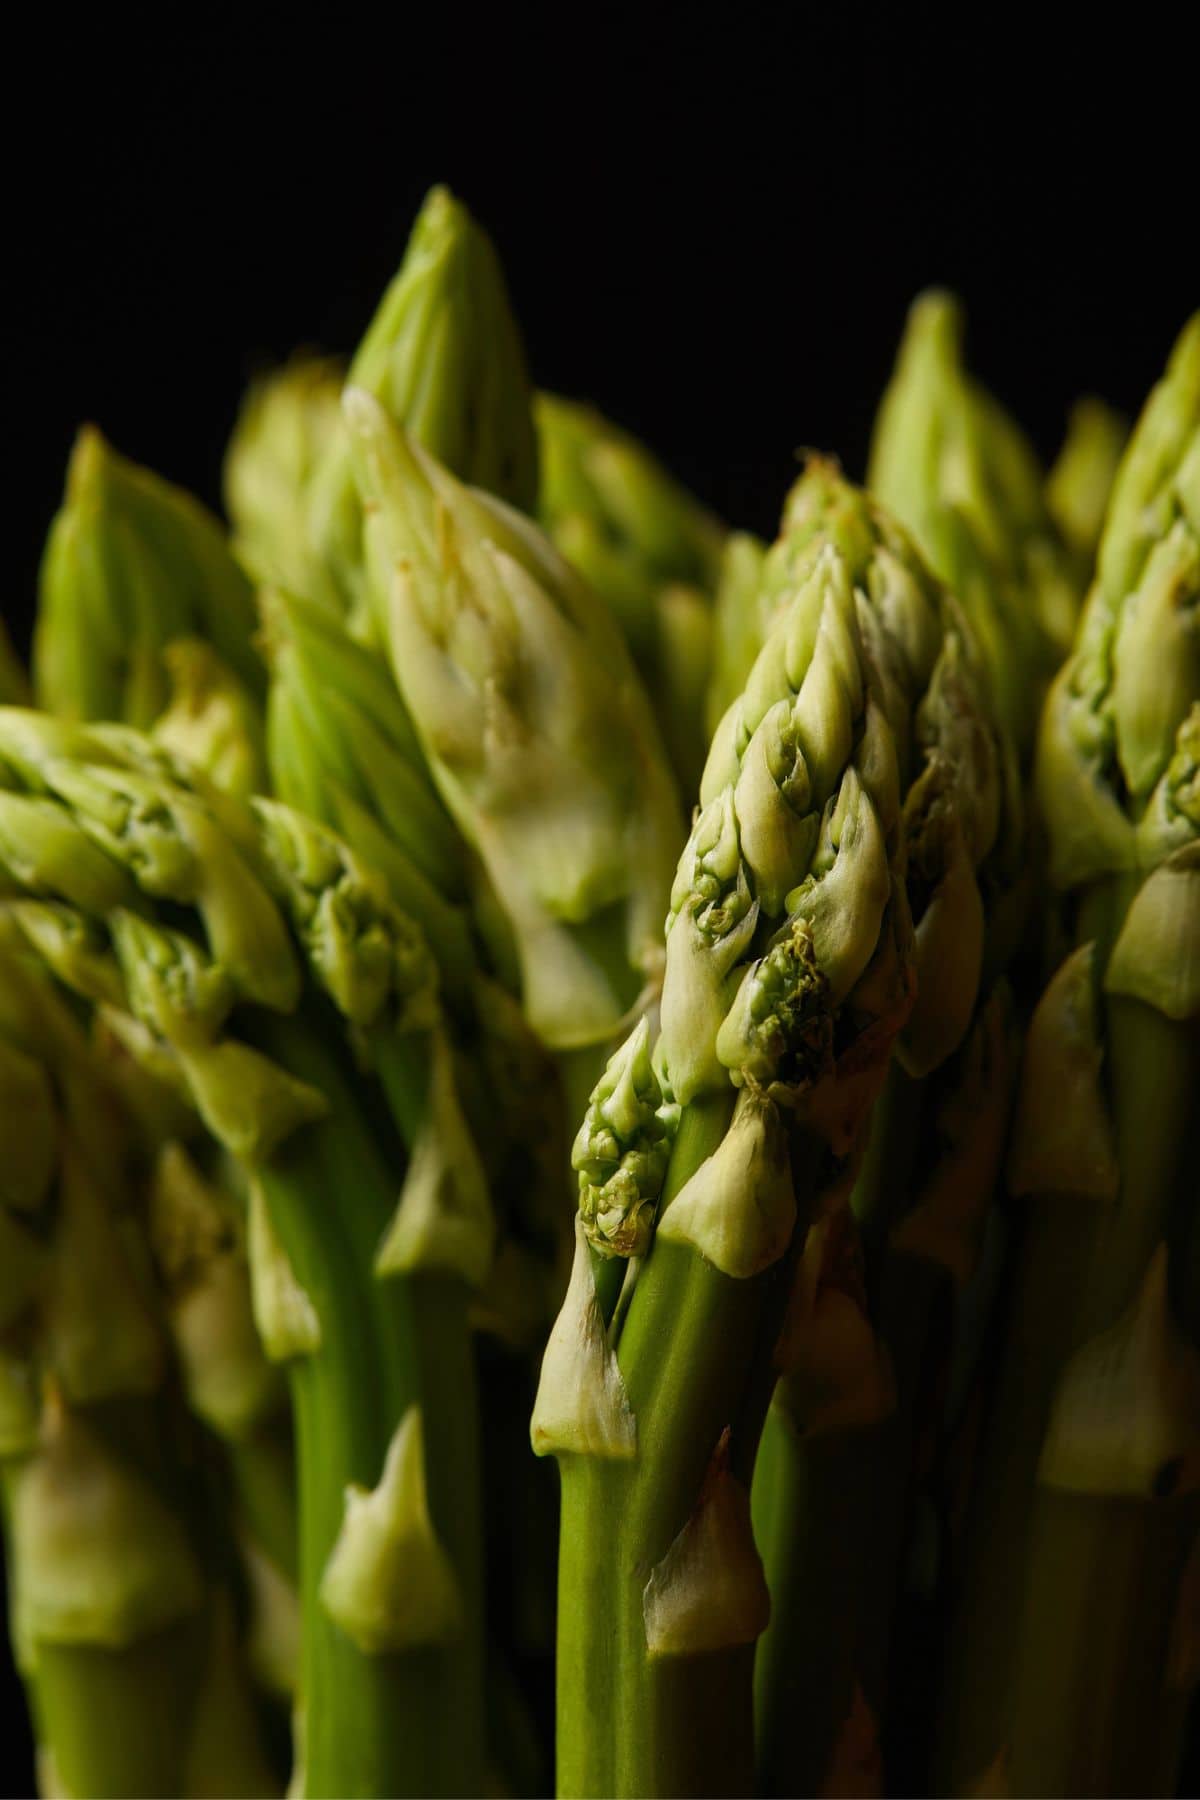 A close-up photo of fresh green asparagus spears against a dark background, ideal for asparagus recipes.